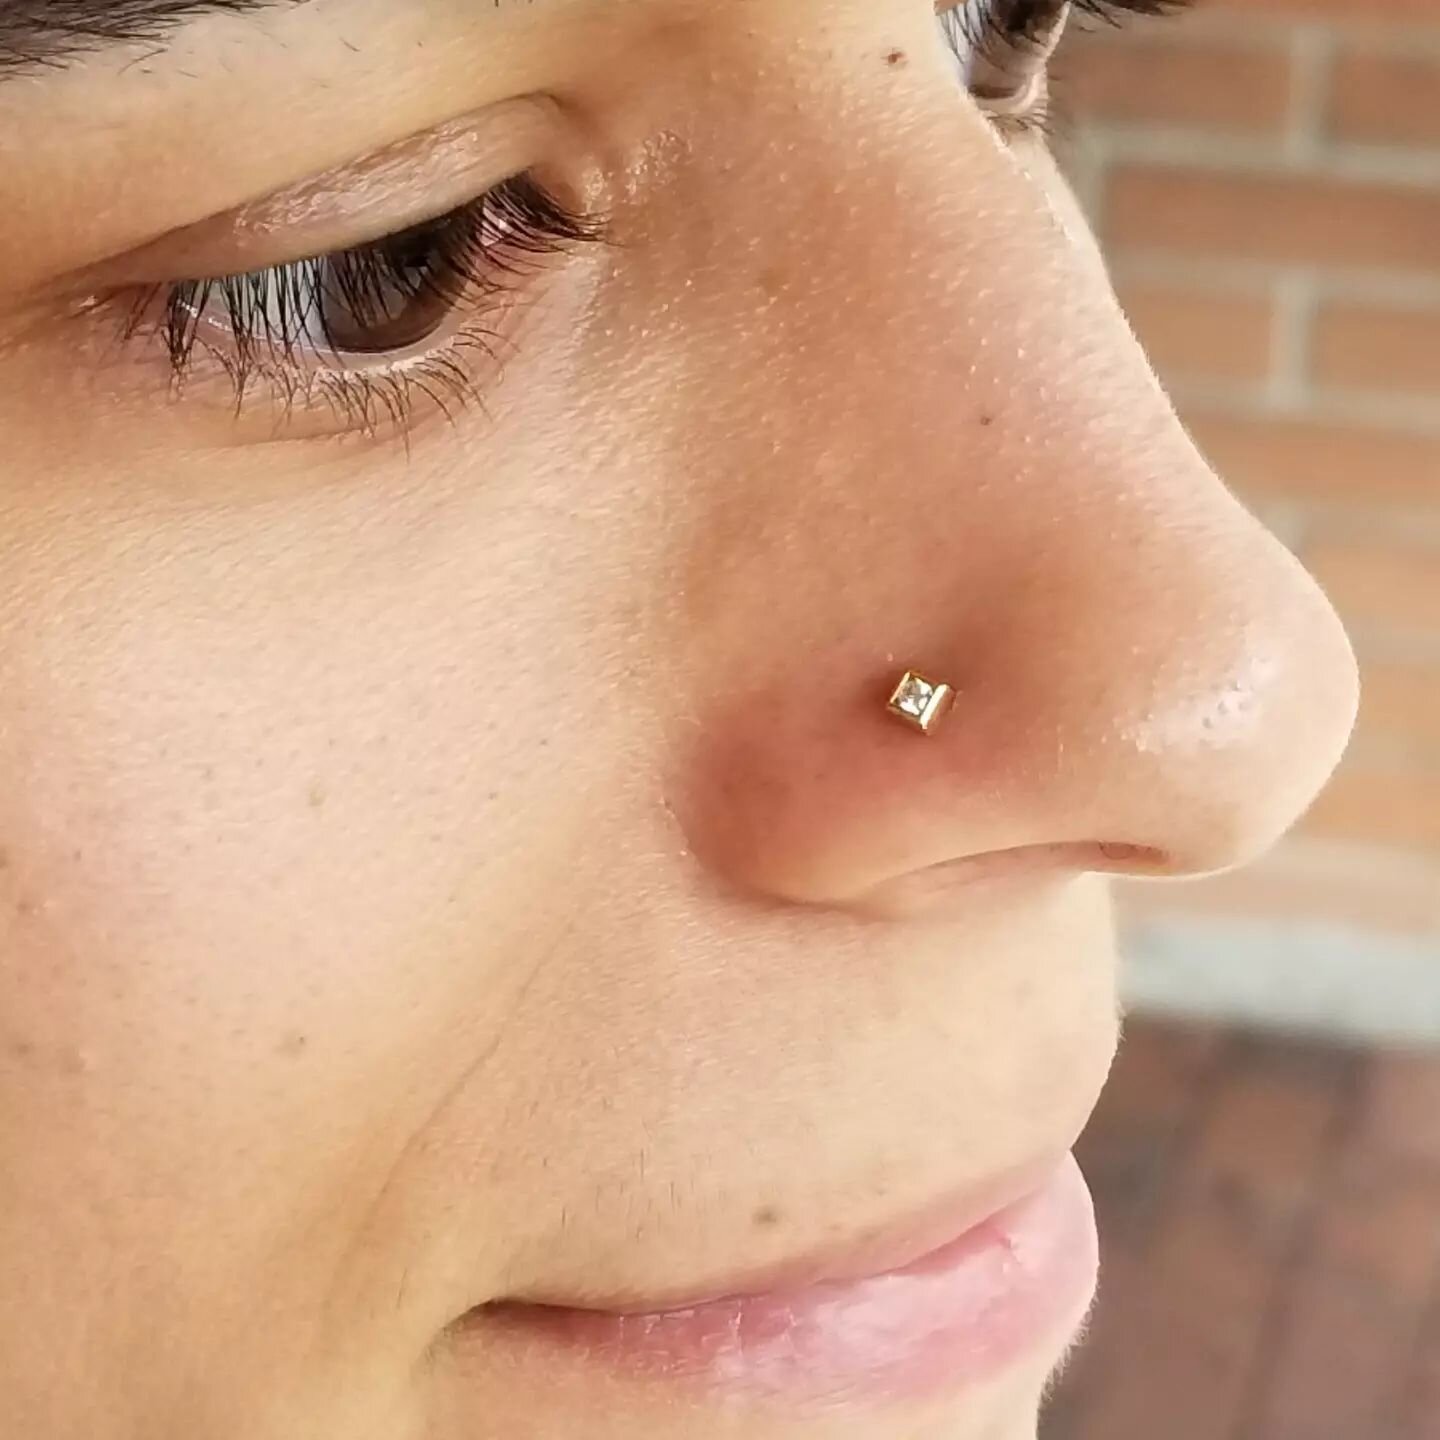 These 14kt gold diamond round stone ends from @leroifinejewellery
are a favorite for nostril piercings. 
Robert @piercingsbyrobert did this one at Needful Things last week.

#nostril #nostrilpiercing #nosepiercing #goldbodyjewelry #goldjewelry #bodyj